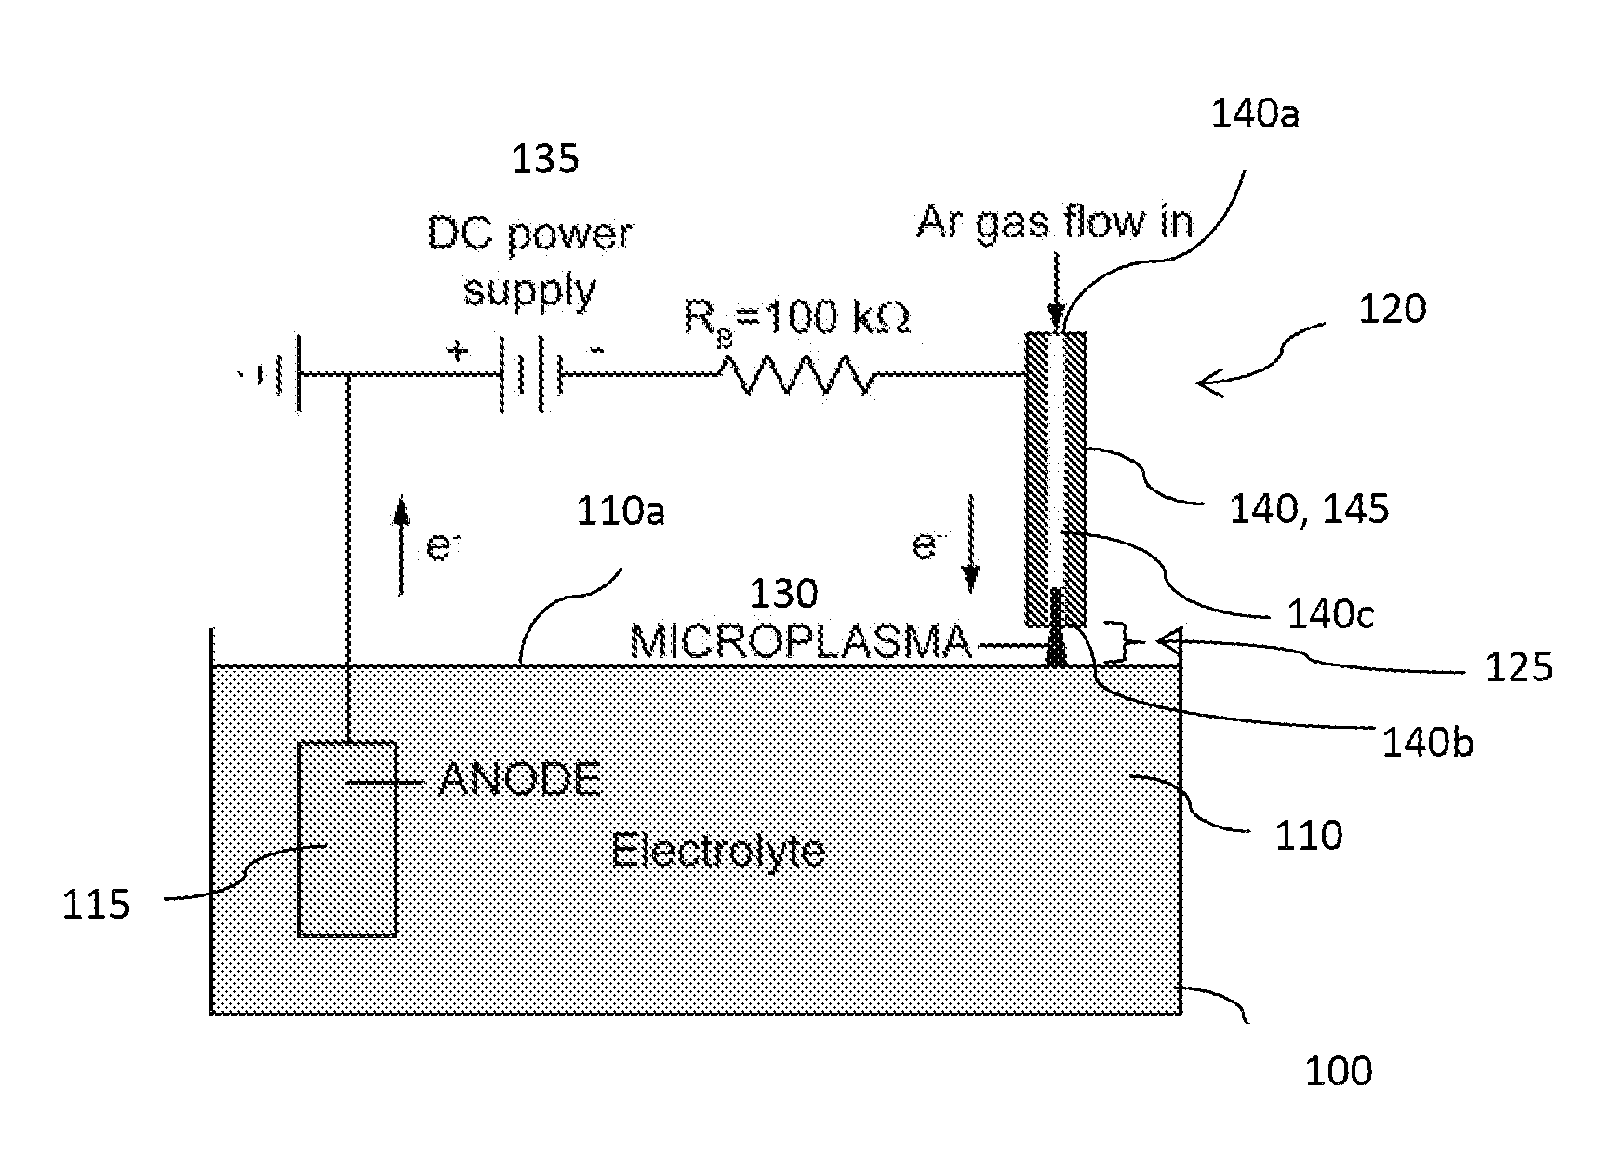 Electrochemical cell including a plasma source and method of operating the electrochemical cell